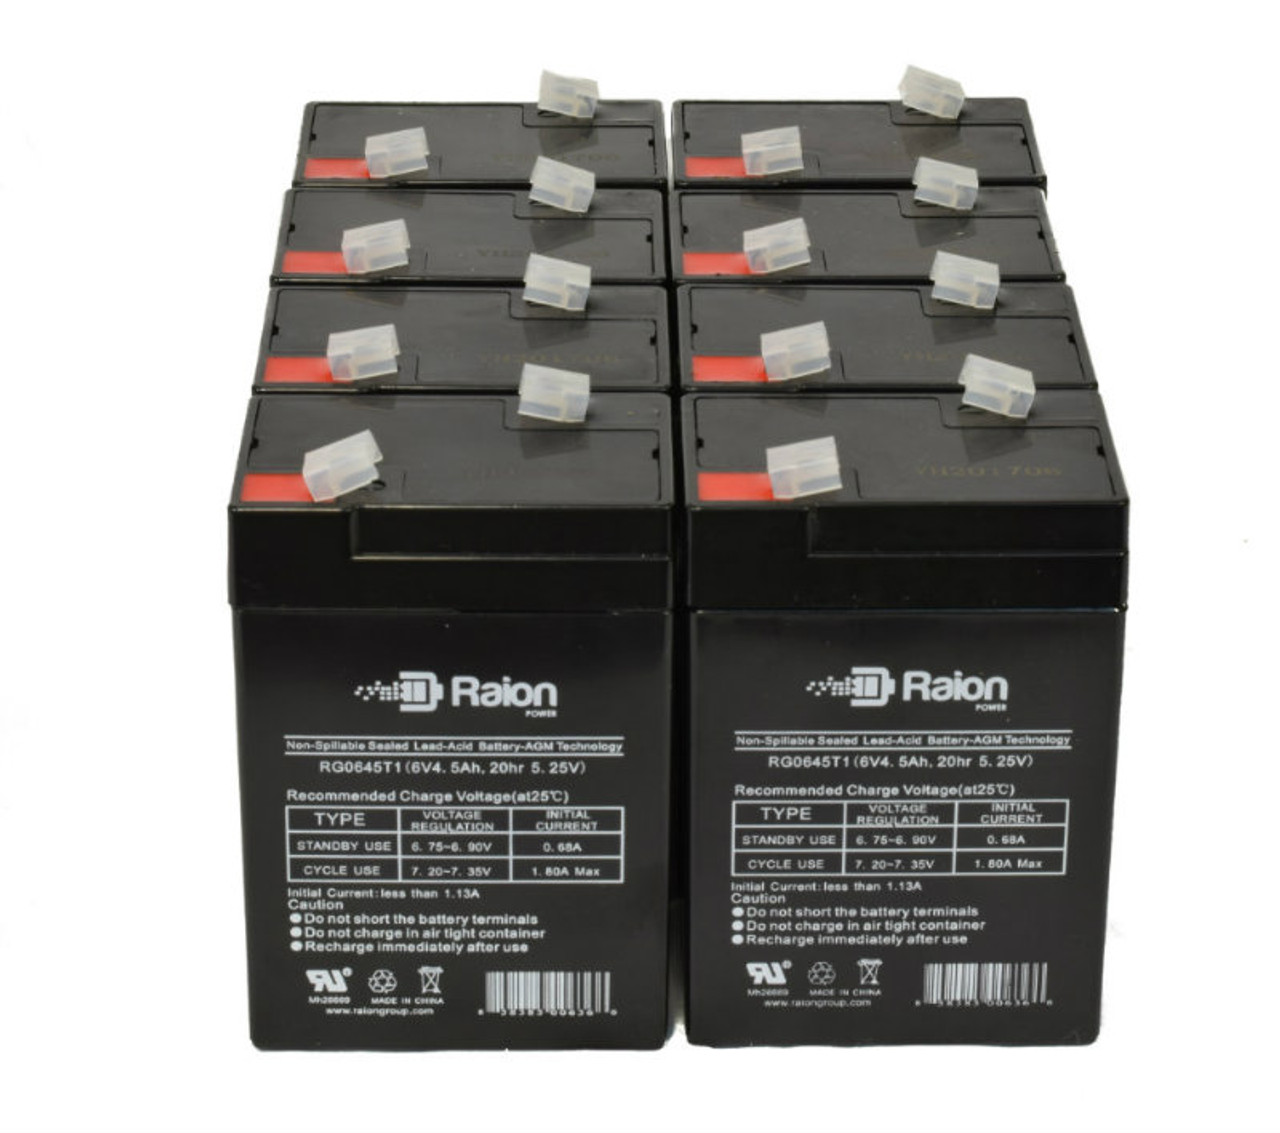 Raion Power RG0645T1 6V 4.5Ah Replacement Medical Equipment Battery for Mcgaw 821 Intelligent Pump - 8 Pack